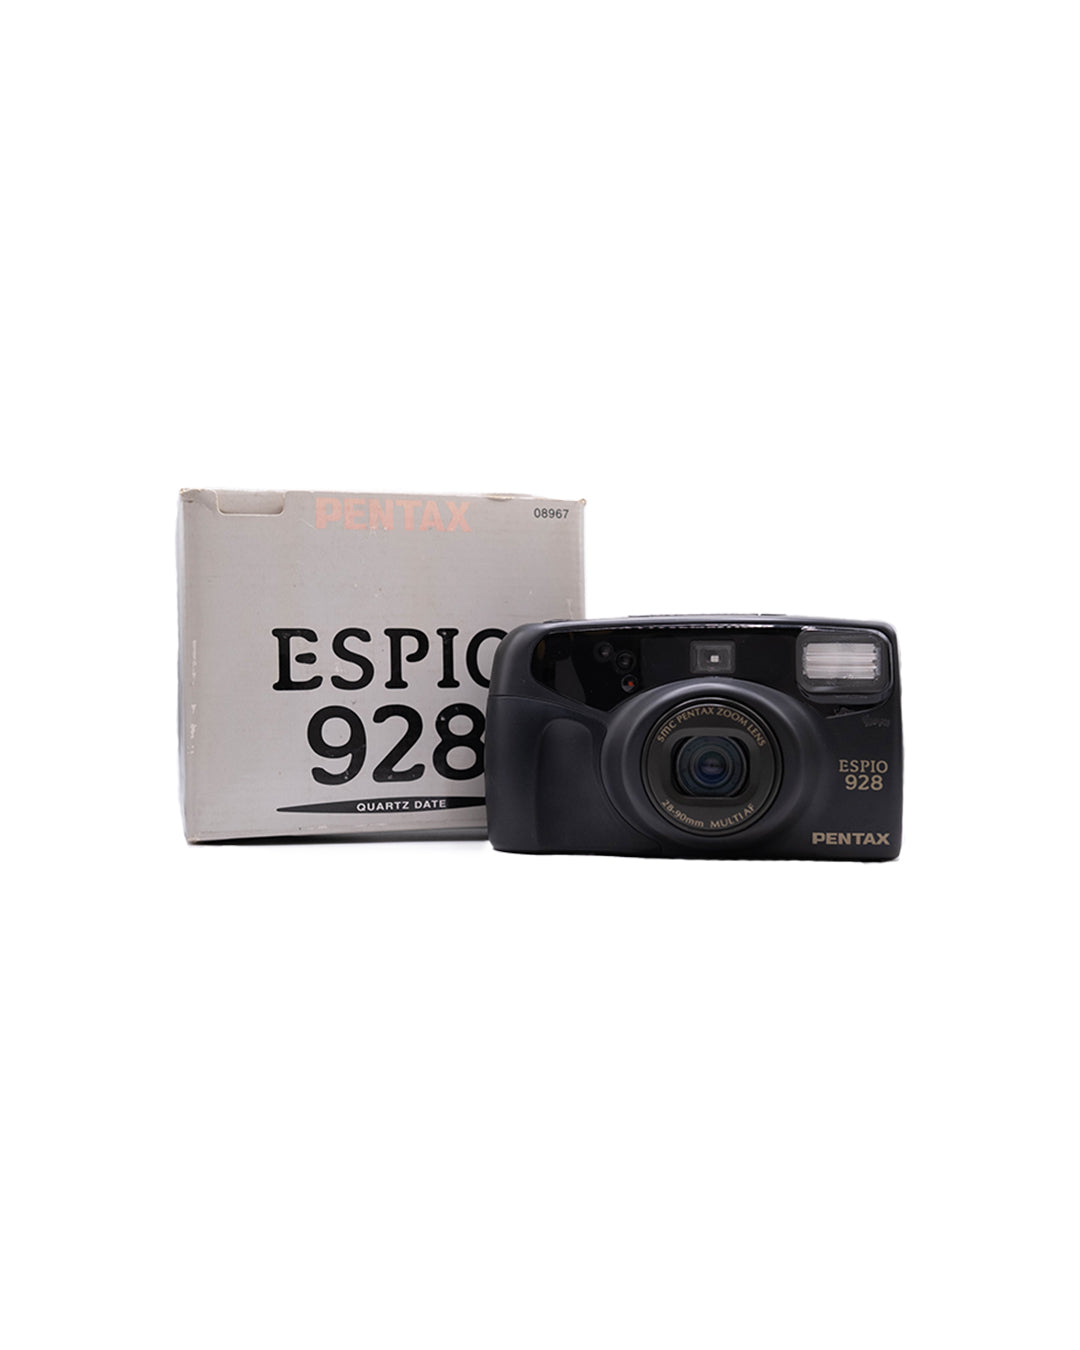 *NEW with BOX Pentax Espio 928 Point & Shoot Camera with 28-90mm f/3.5-9 lens